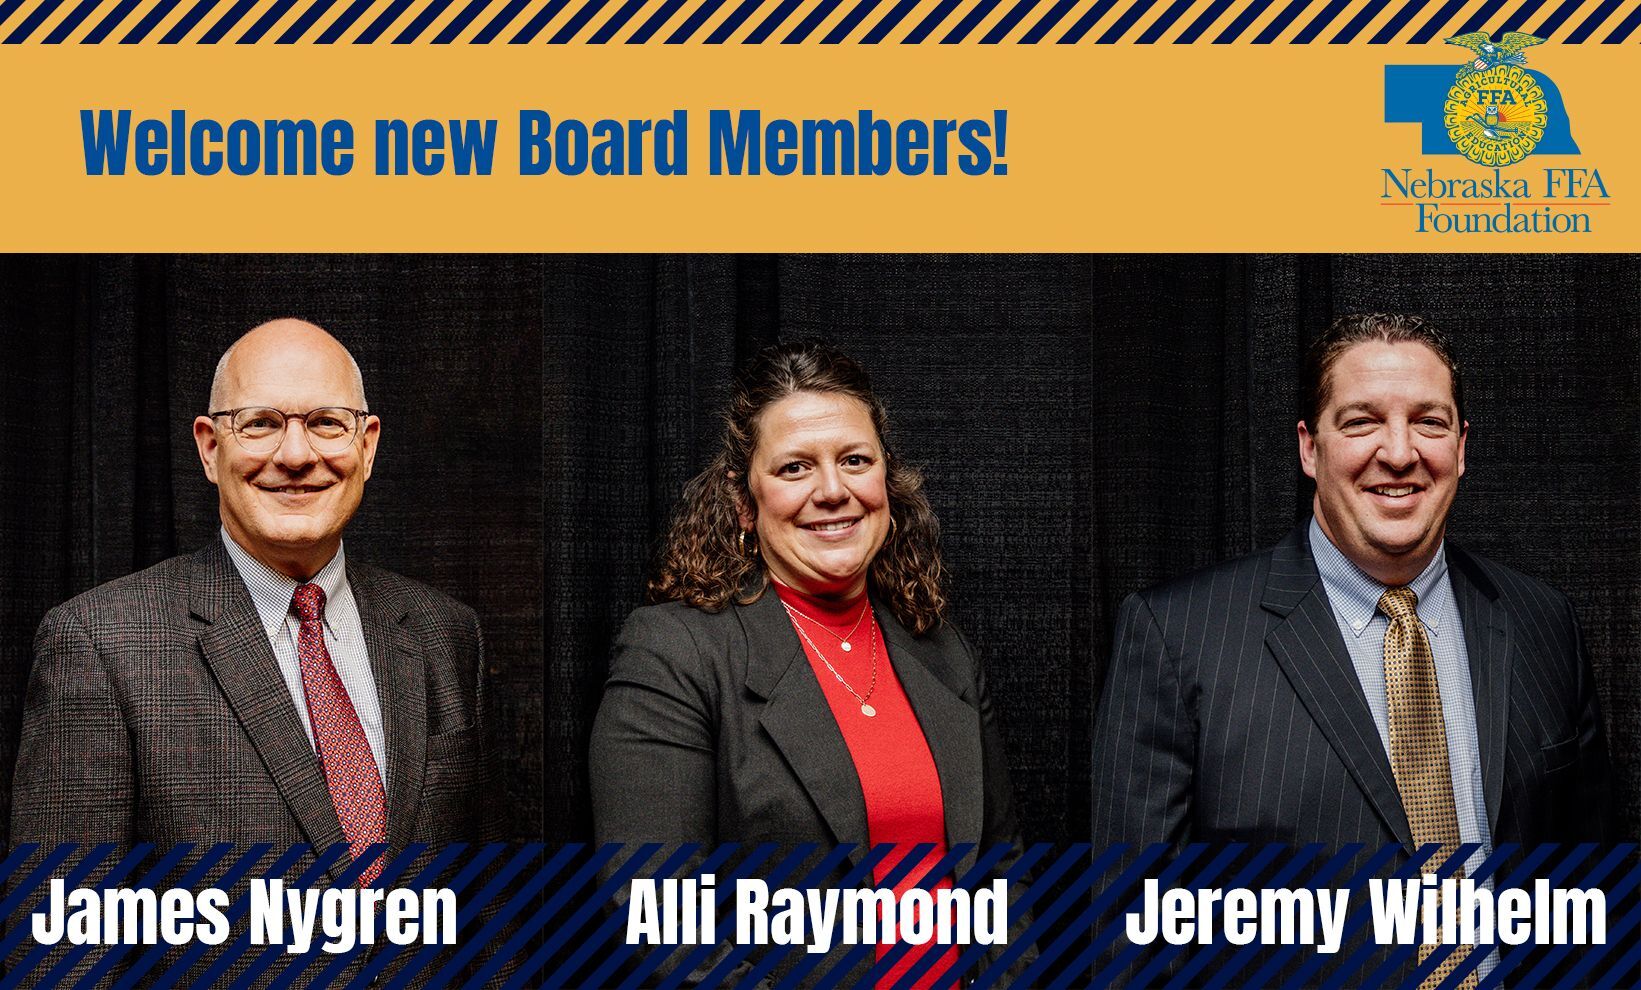 Foundation Welcomes New Board Members